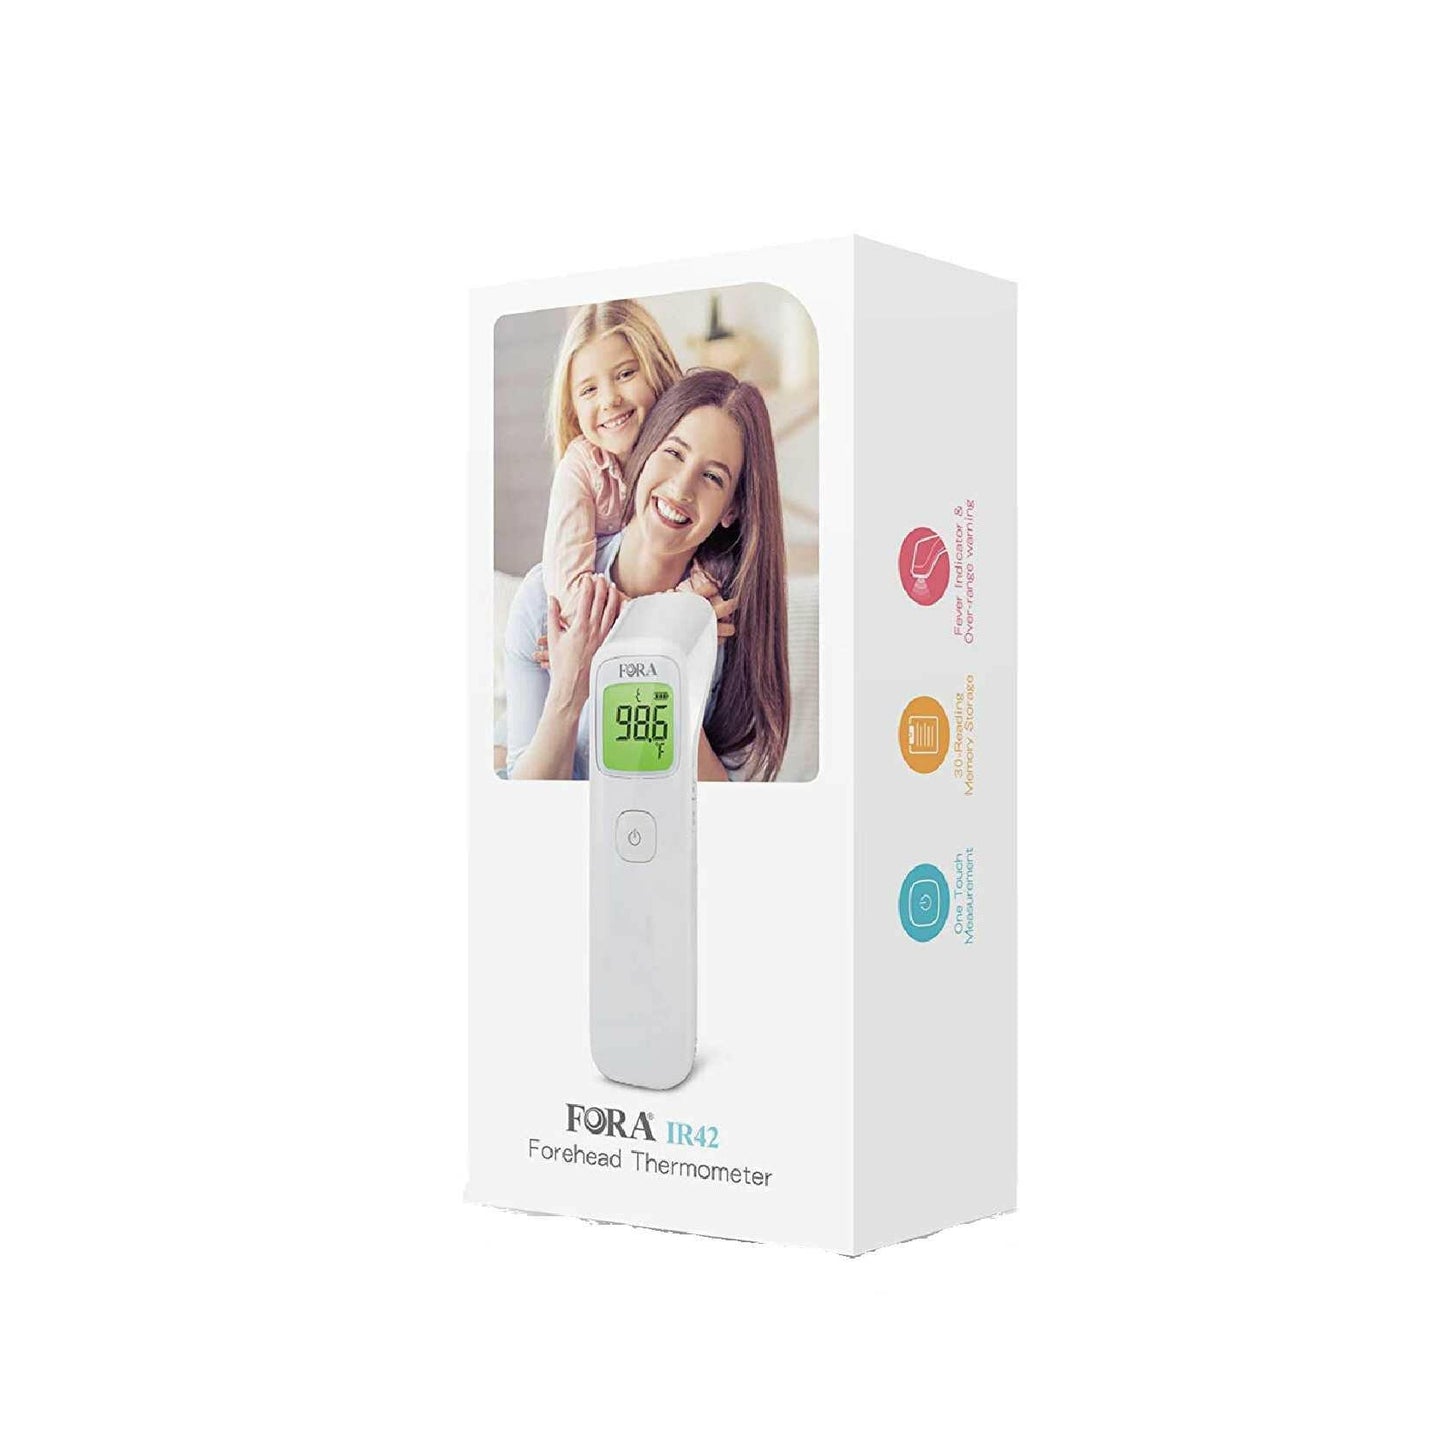 FORA IR42 Medical Grade Non-Contact Forehead Thermometer. Fever Indicator for Baby, Kids, Toddlers and Adults Fora Care Inc.